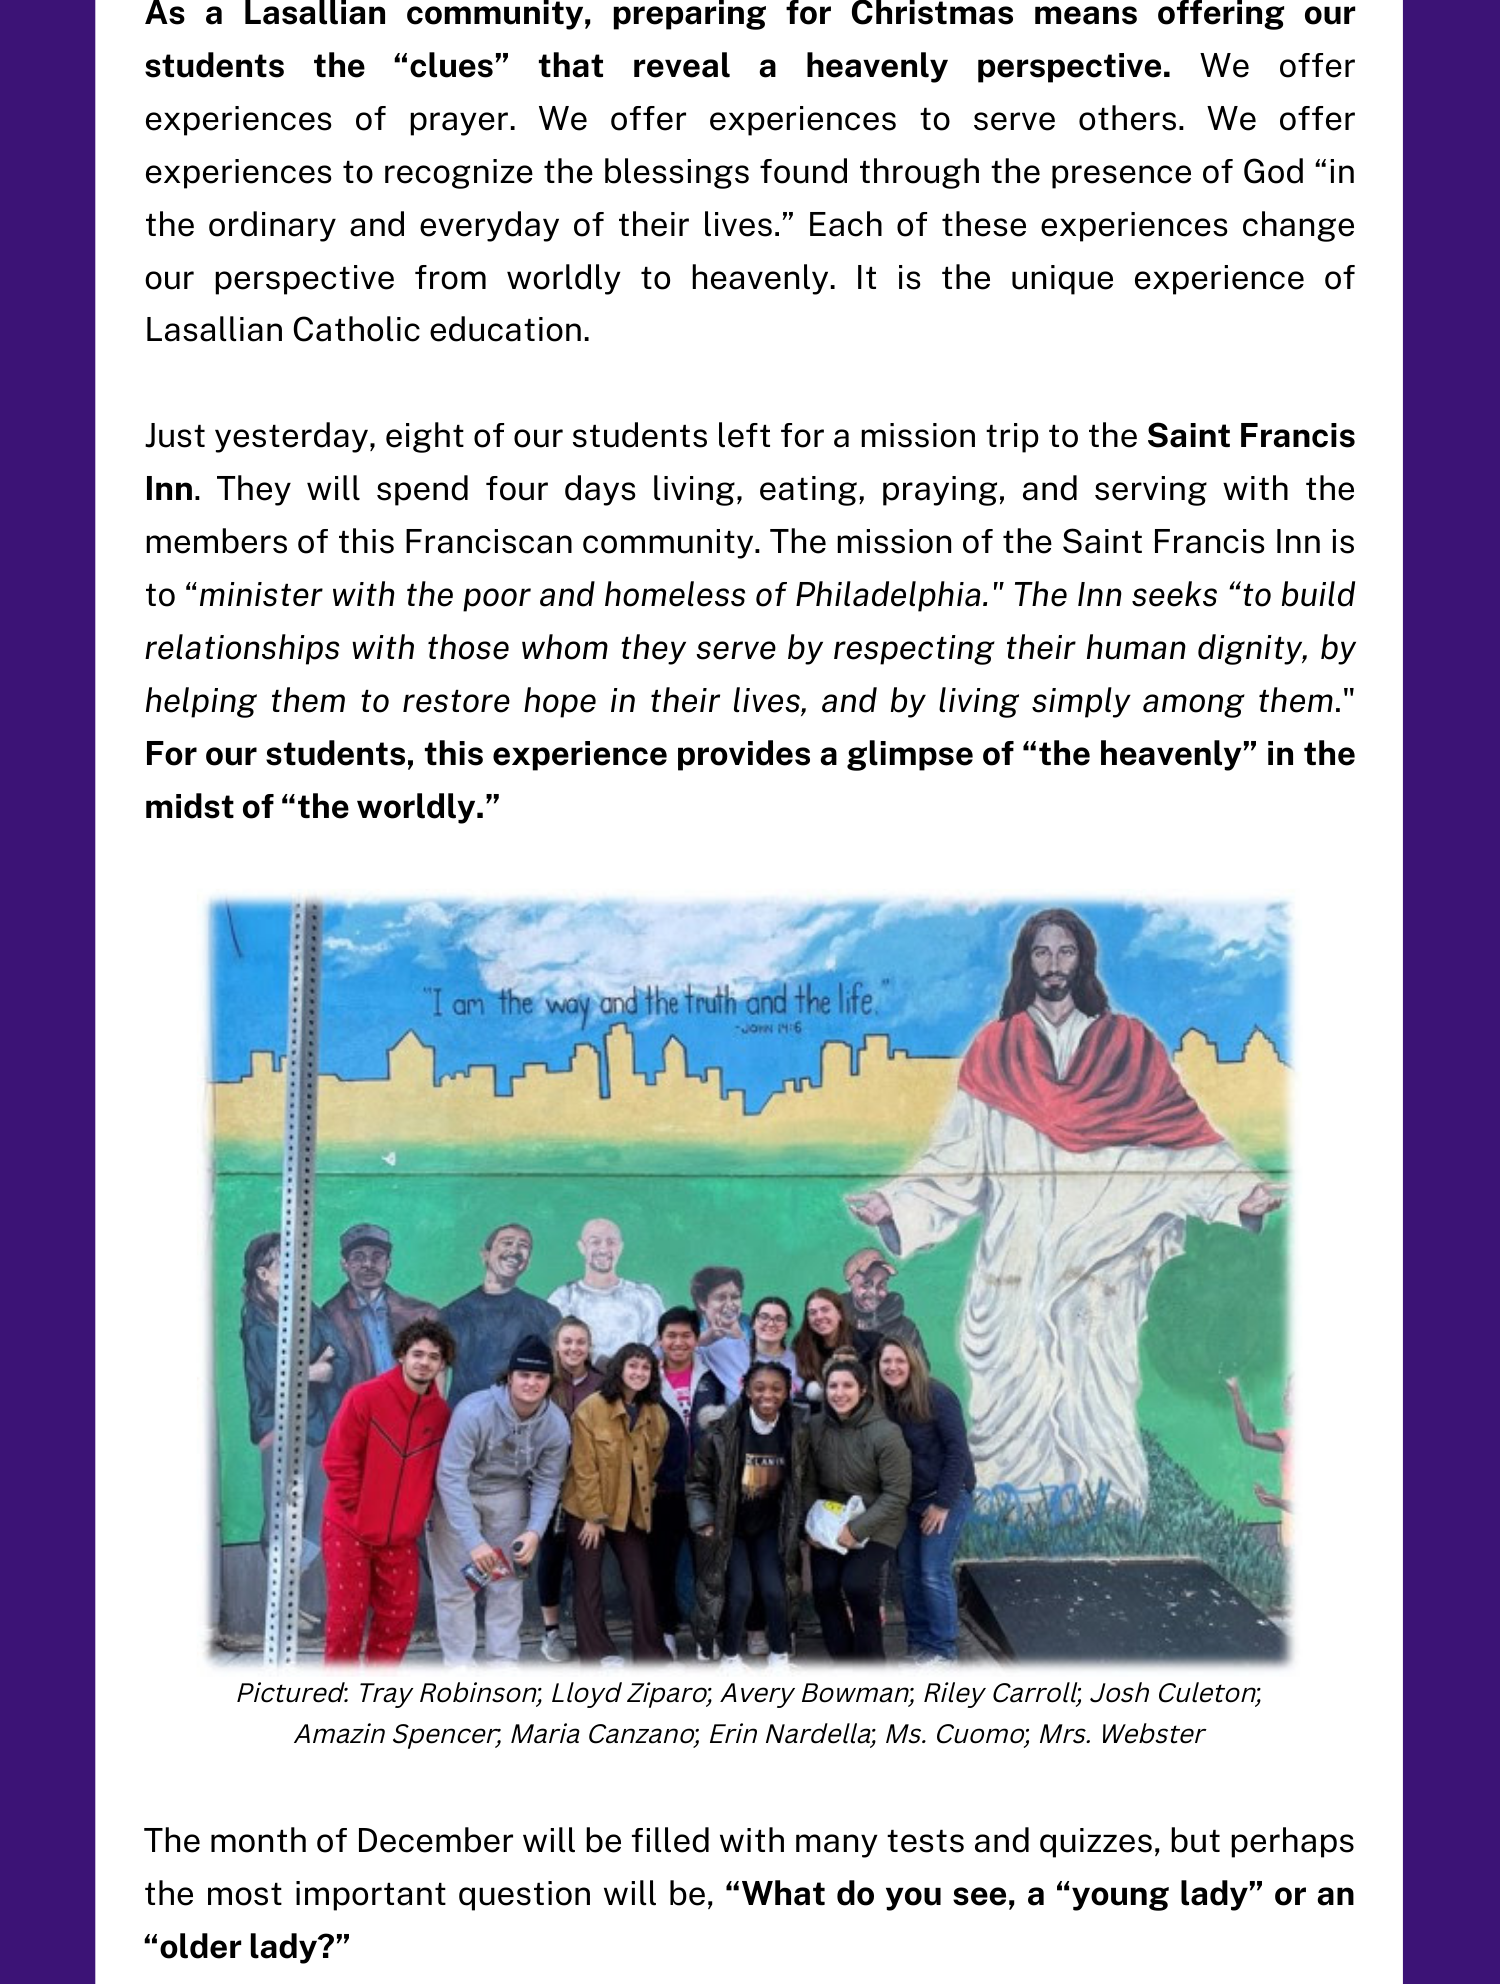 Christian Brothers Academy Private School in Syracuse, NY Students left for Mission Trip to Philadelphia to minister the poor and homeless